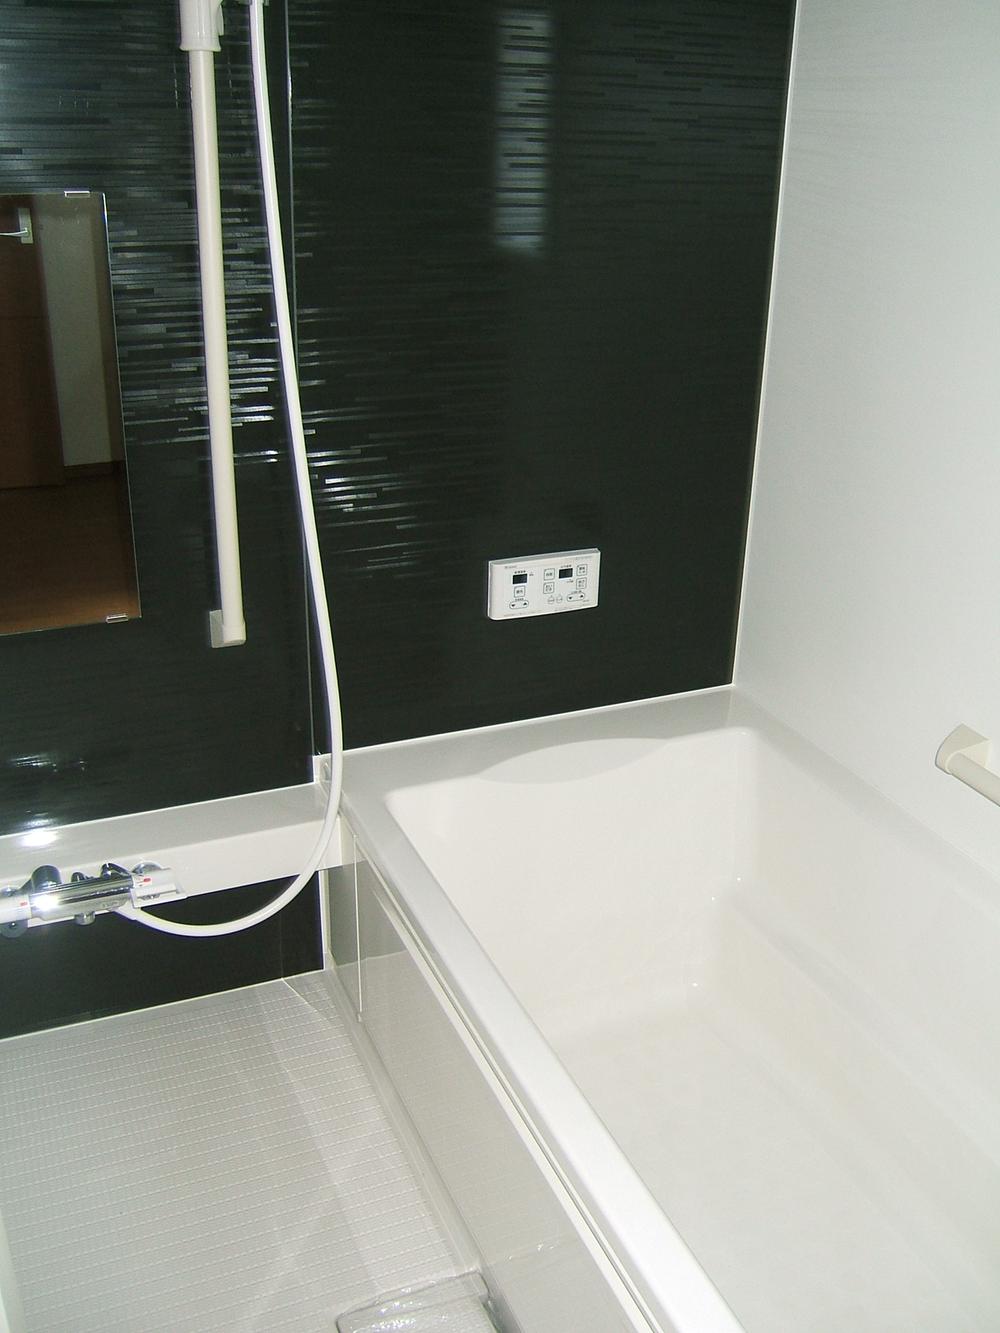 Same specifications photo (bathroom). The company specification example